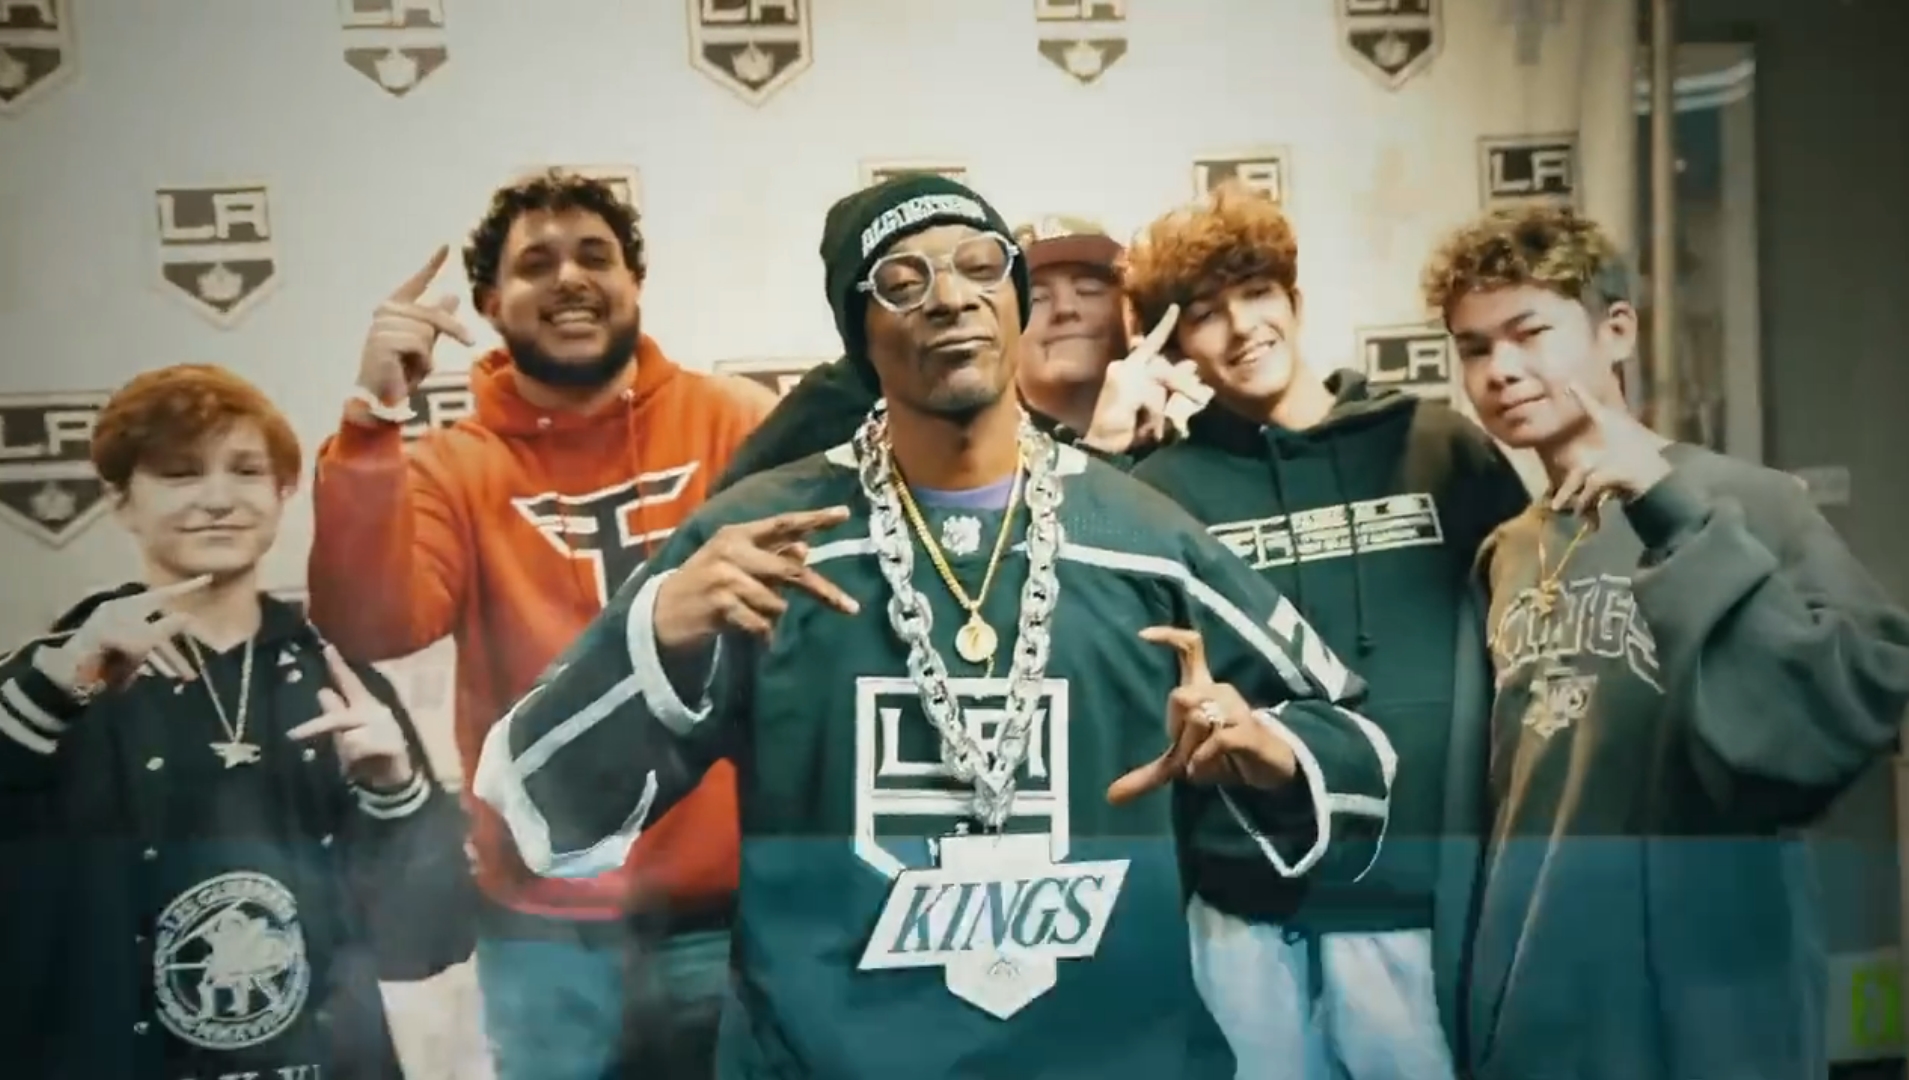 FaZe the f**k up” – Rapper Snoop Dogg officially becomes FaZe Snoop. Yes,  for real.